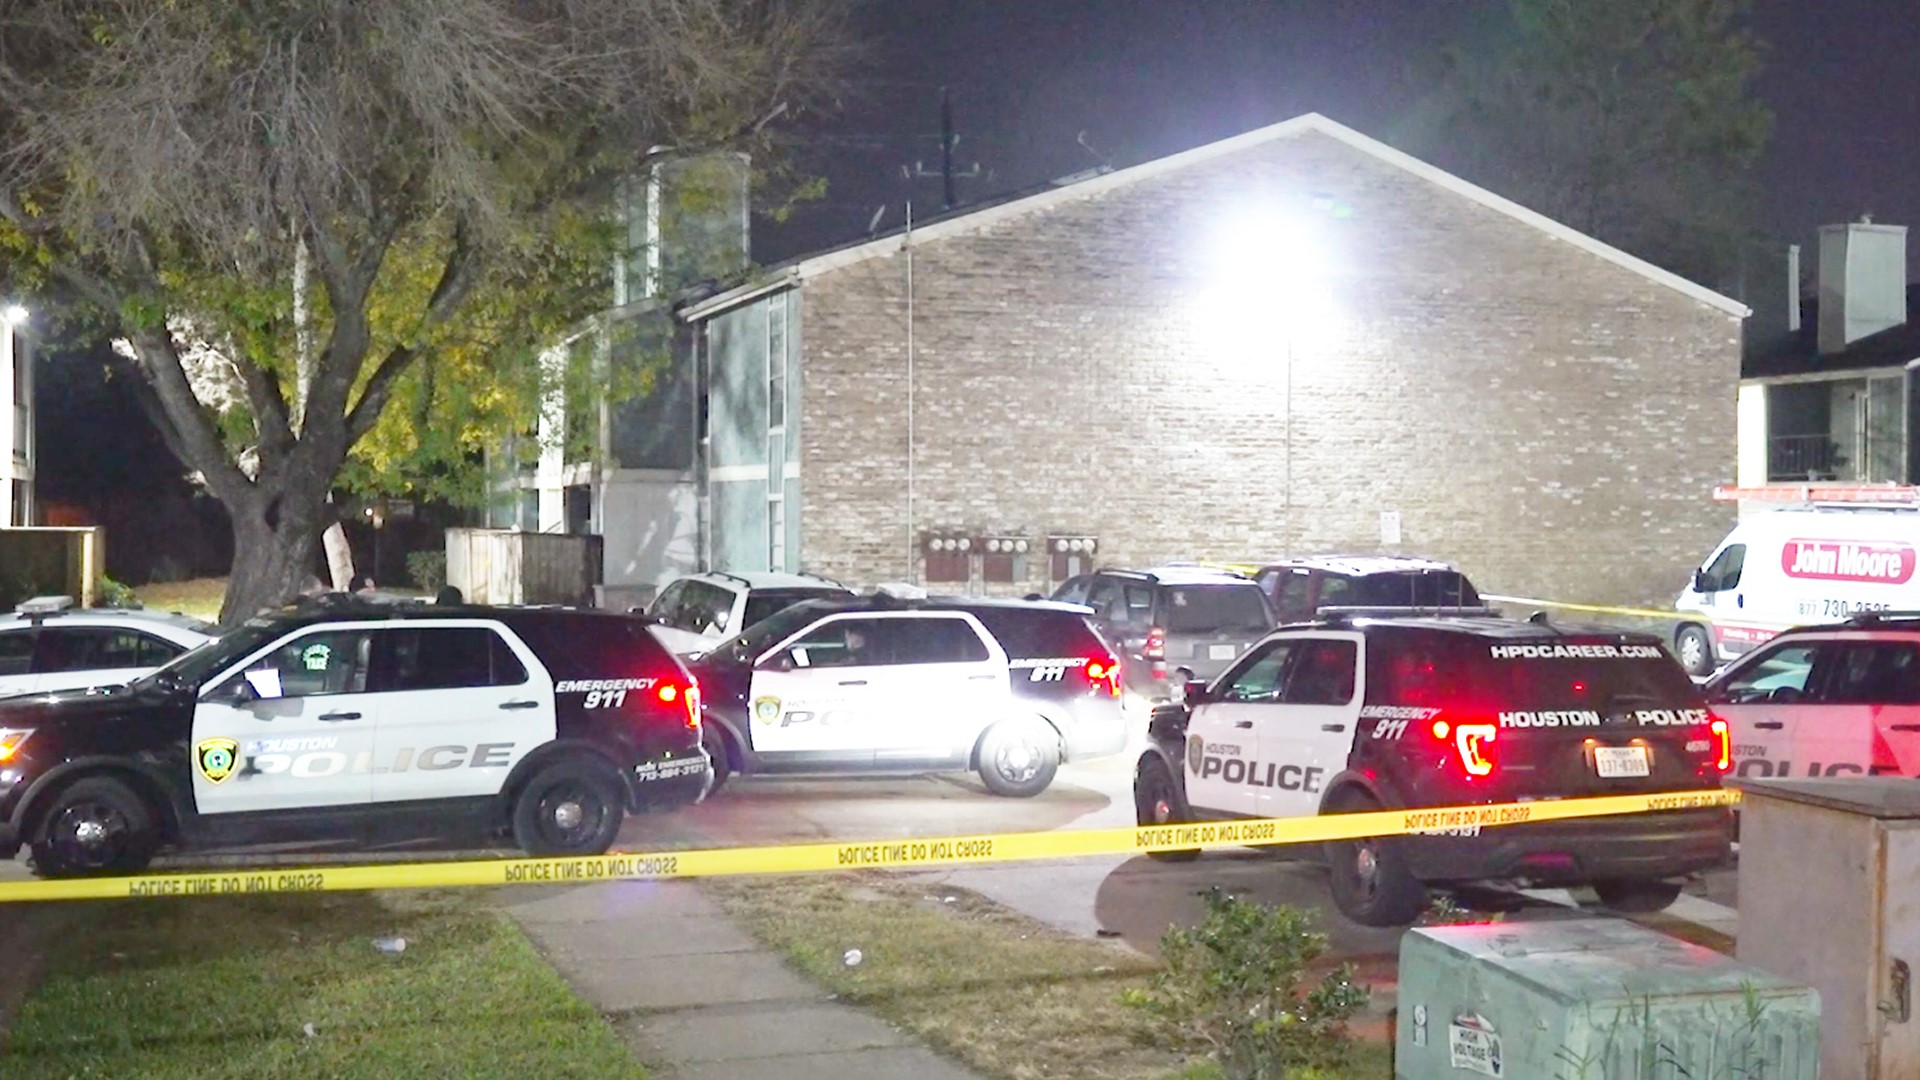 Houston police homicide investigators are questioning multiple people who were inside an apartment where a young woman was fatally shot on late Sunday.